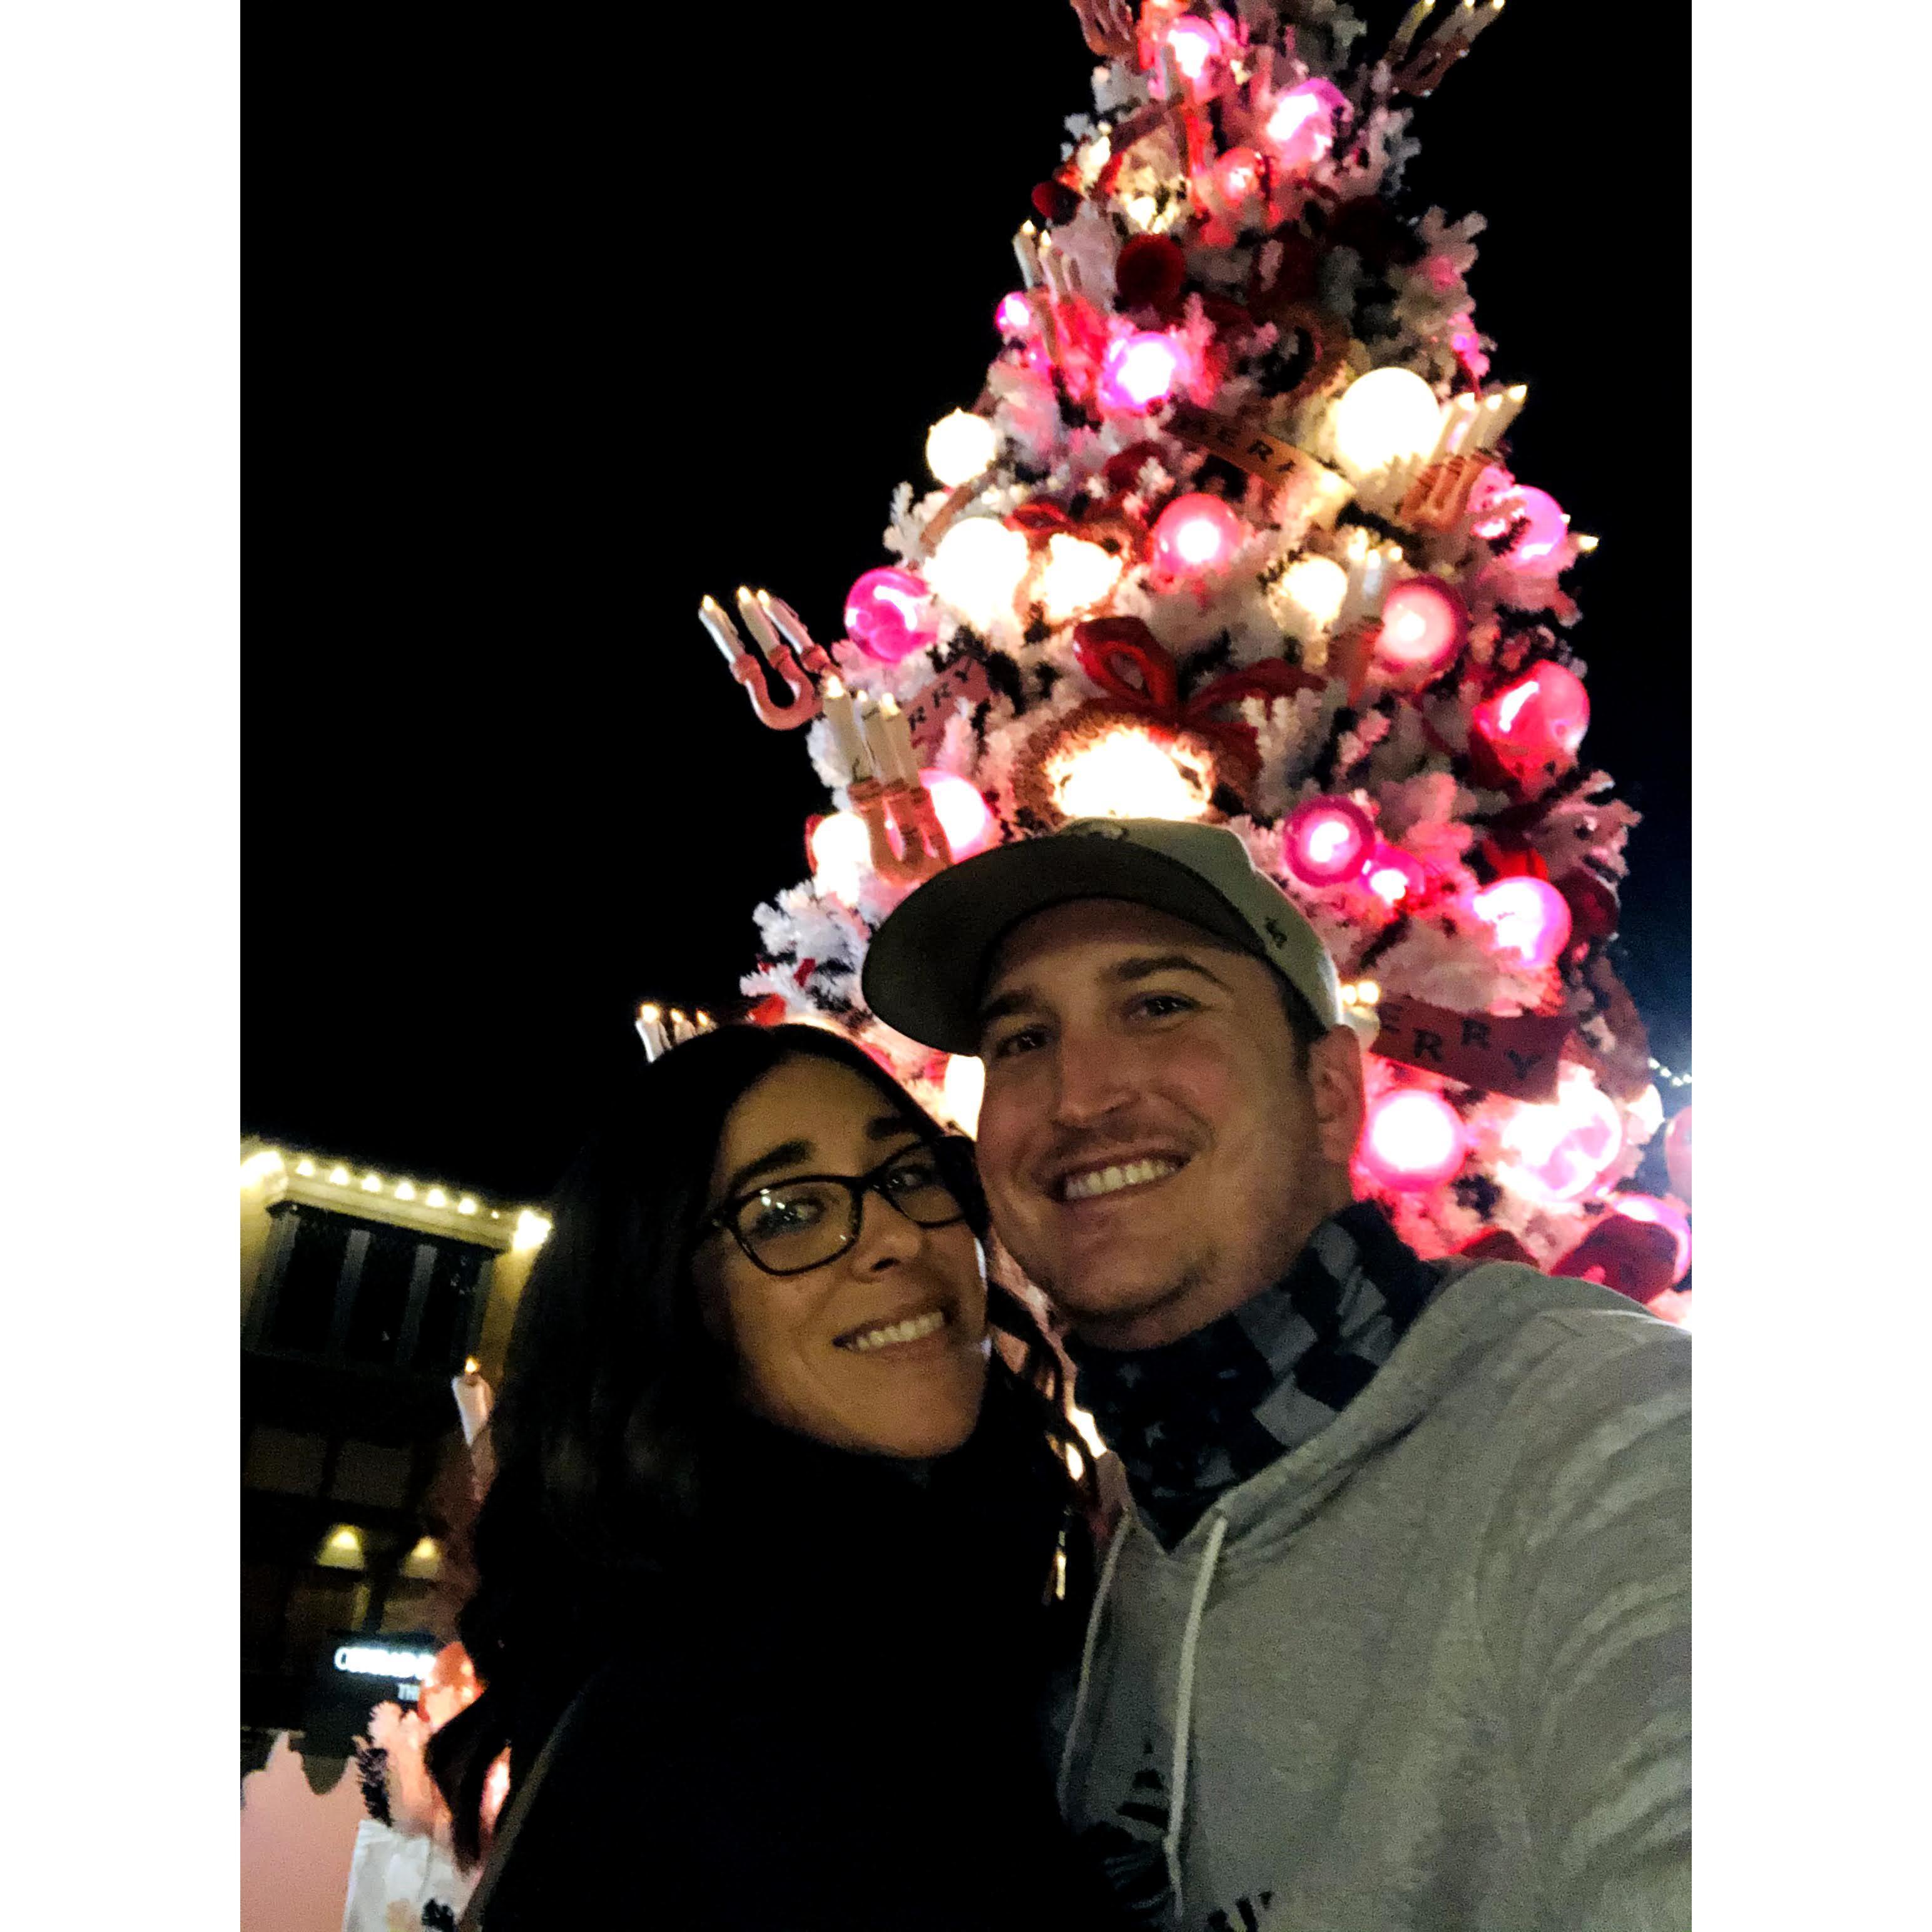 Where: Balboa Park, CA
When: December 23, 2020
Why: Our first Christmas together while dating. We became official at like 2am in the morning on January 1, 2021 after a NYE party